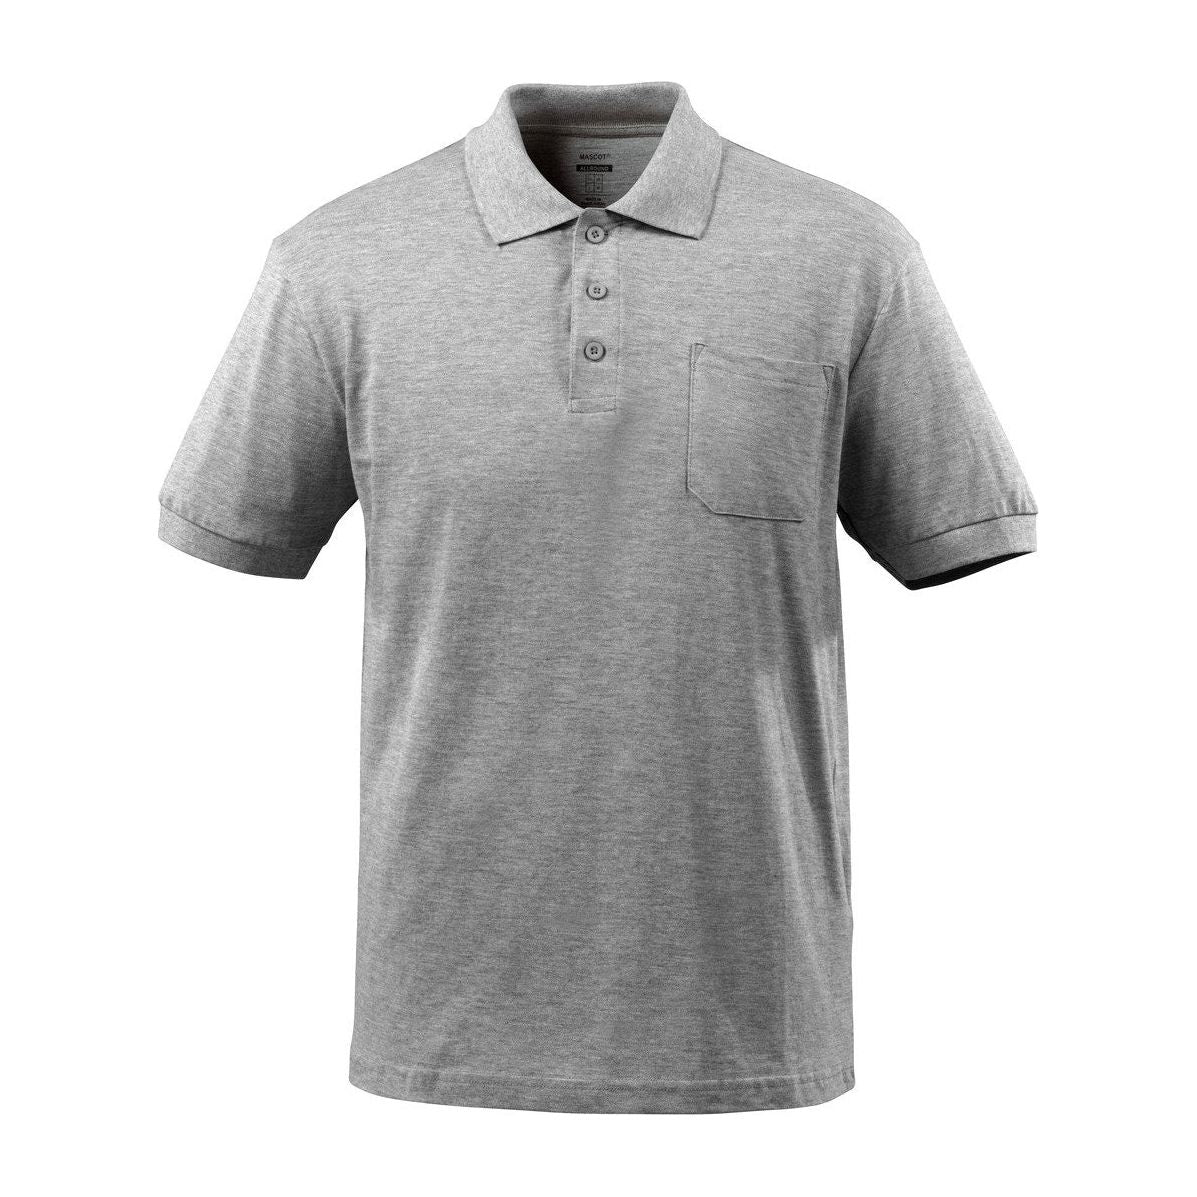 Mascot Orgon Polo Shirt Chest-Pocket Anthracite Grey 51586-968-888 Front